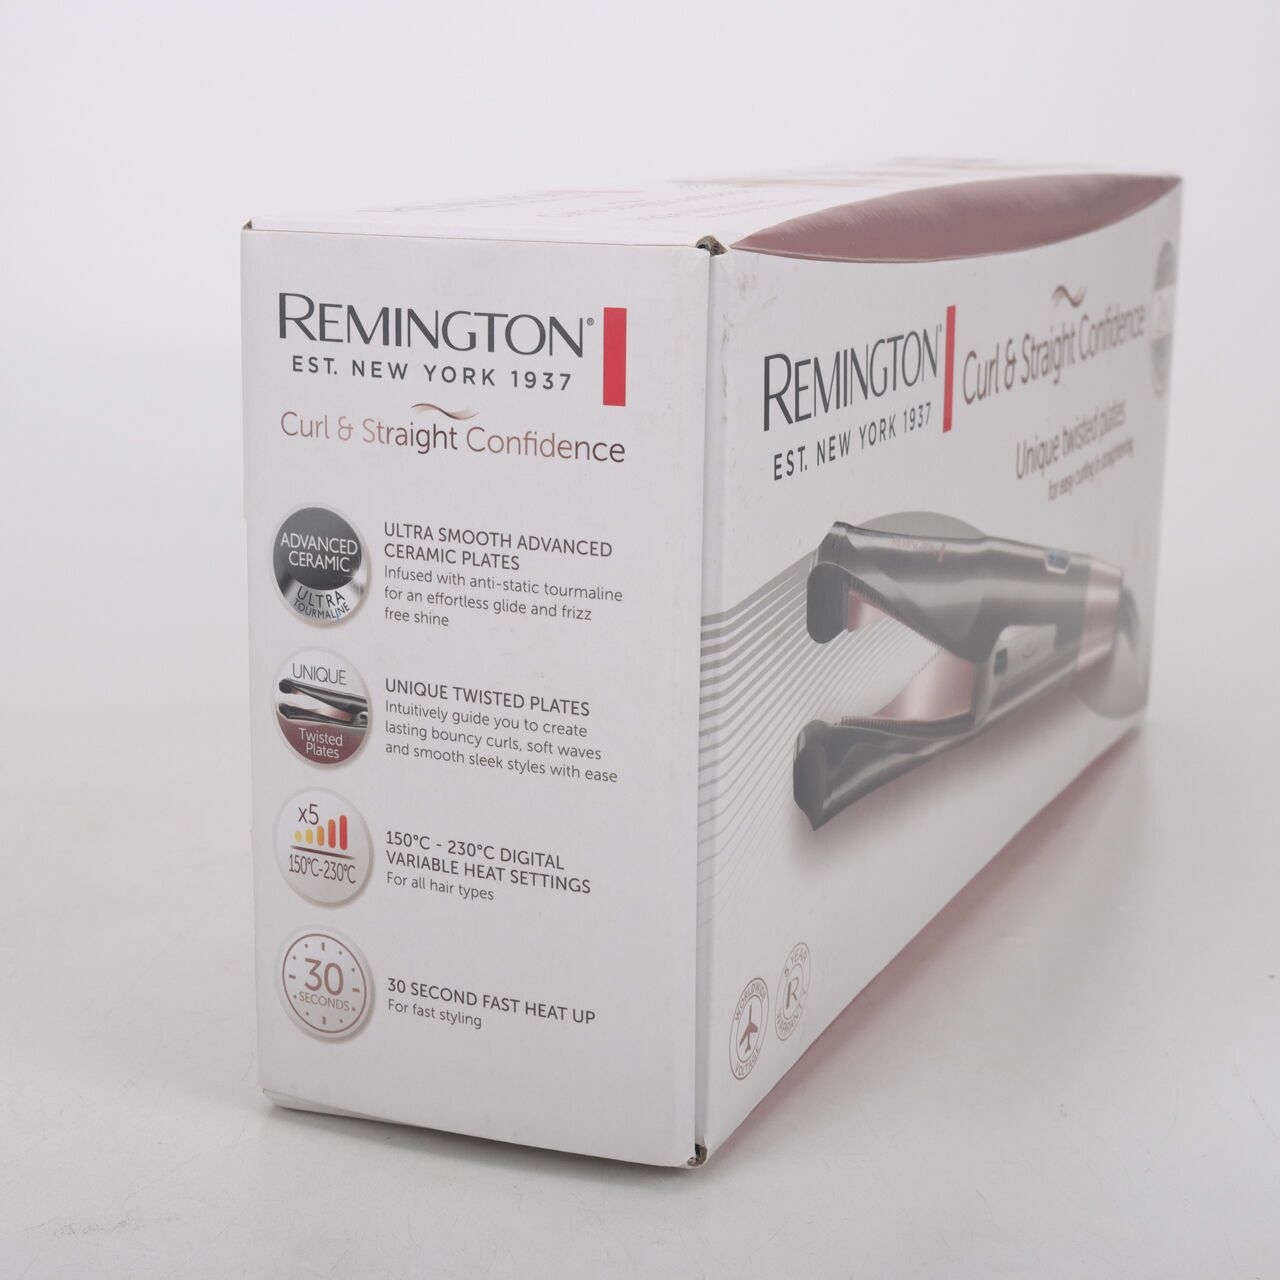 Remington Curl & Straight Confidence Hair Tools